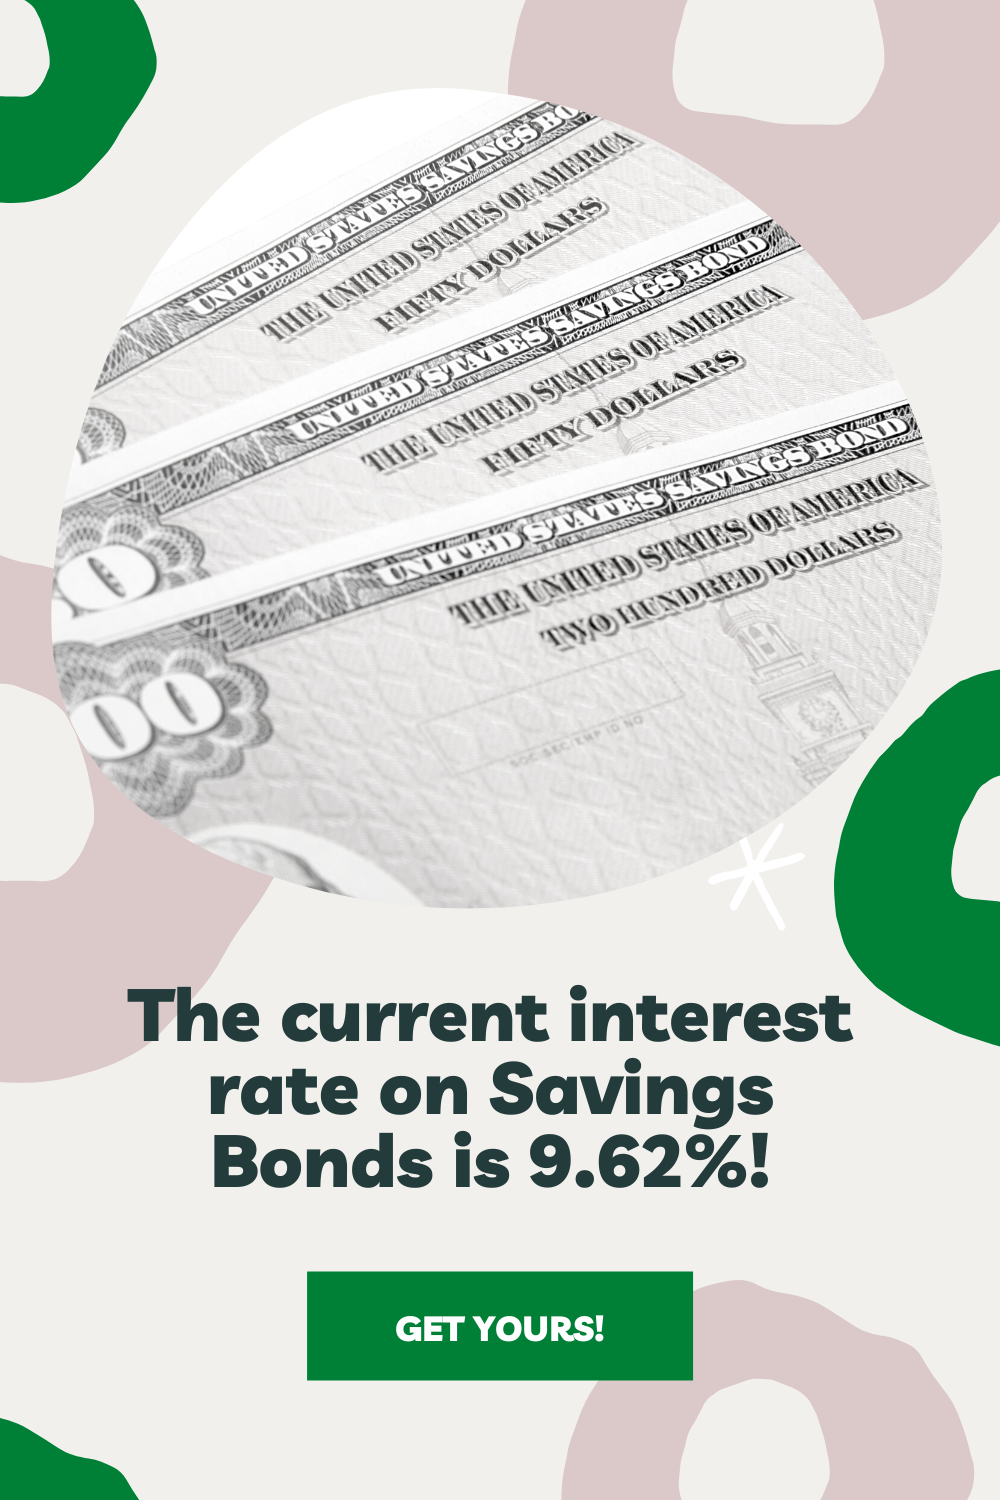 The current interest rate on new Series I savings bonds is 9.62% (compared to Series EE which is only 0.10%). You can buy up to $10K in bonds (minimum $25) at that rate through October 2022.